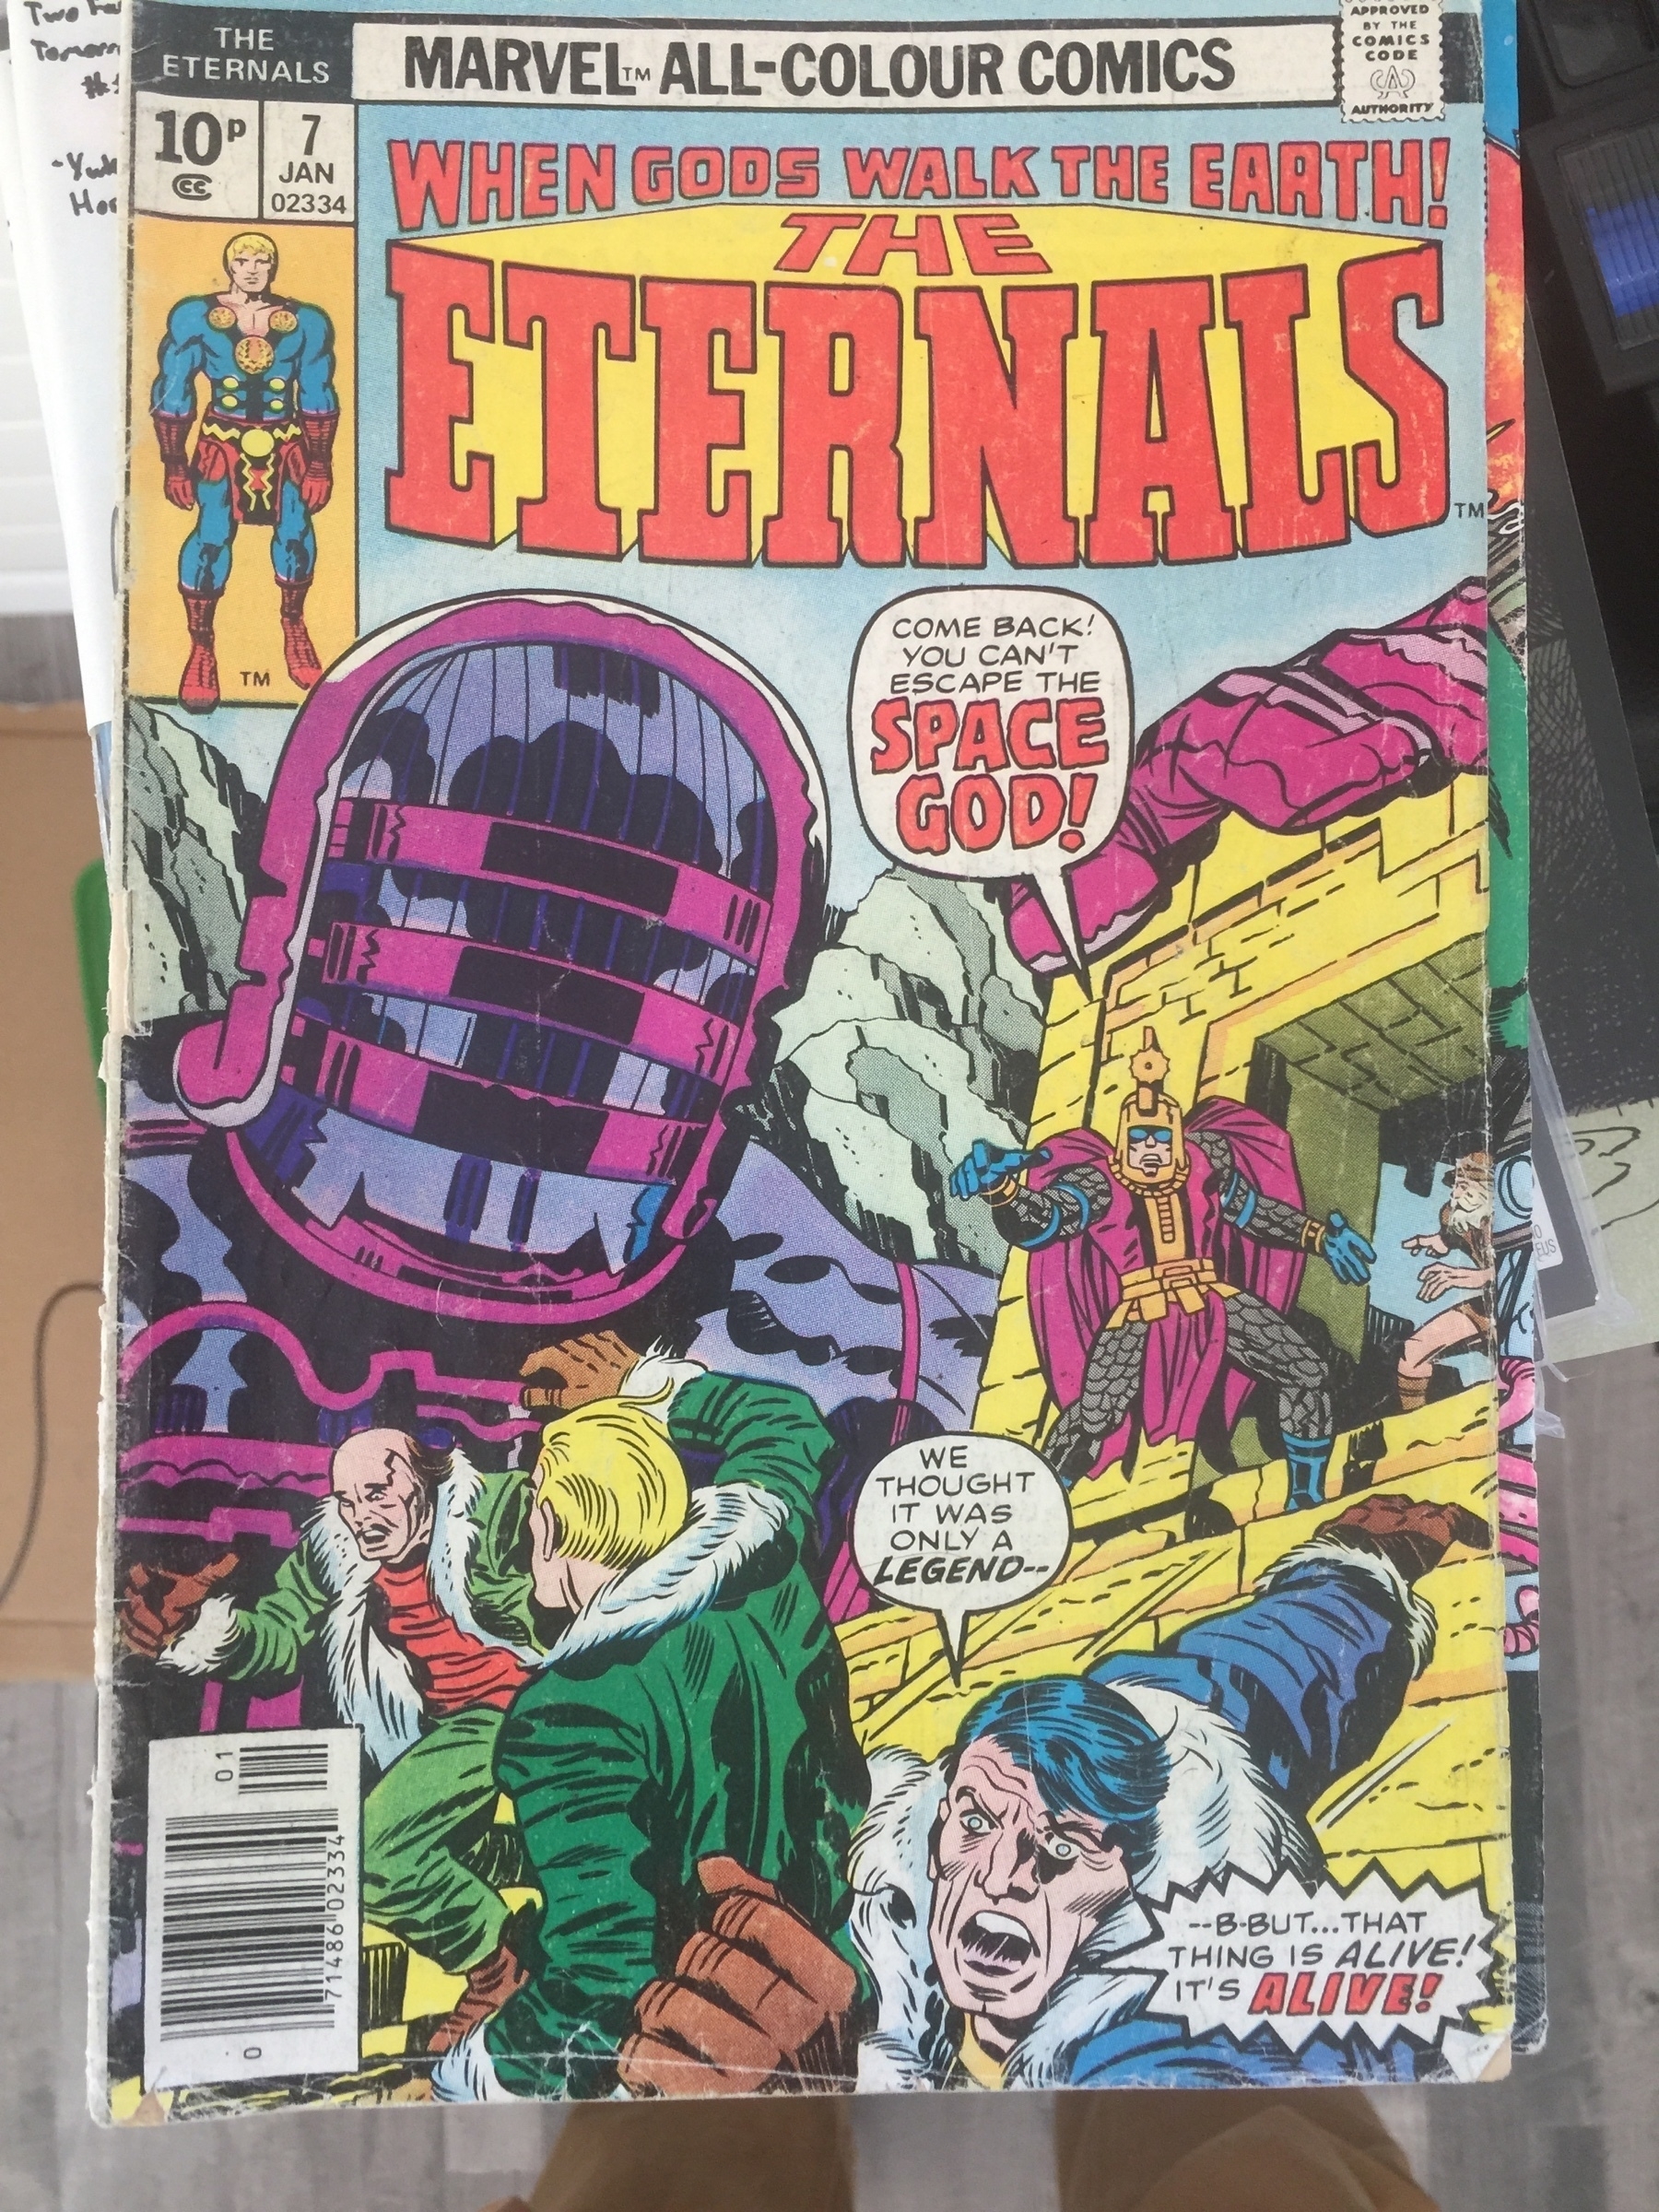 the cover of Jack Kirby Eternals #7